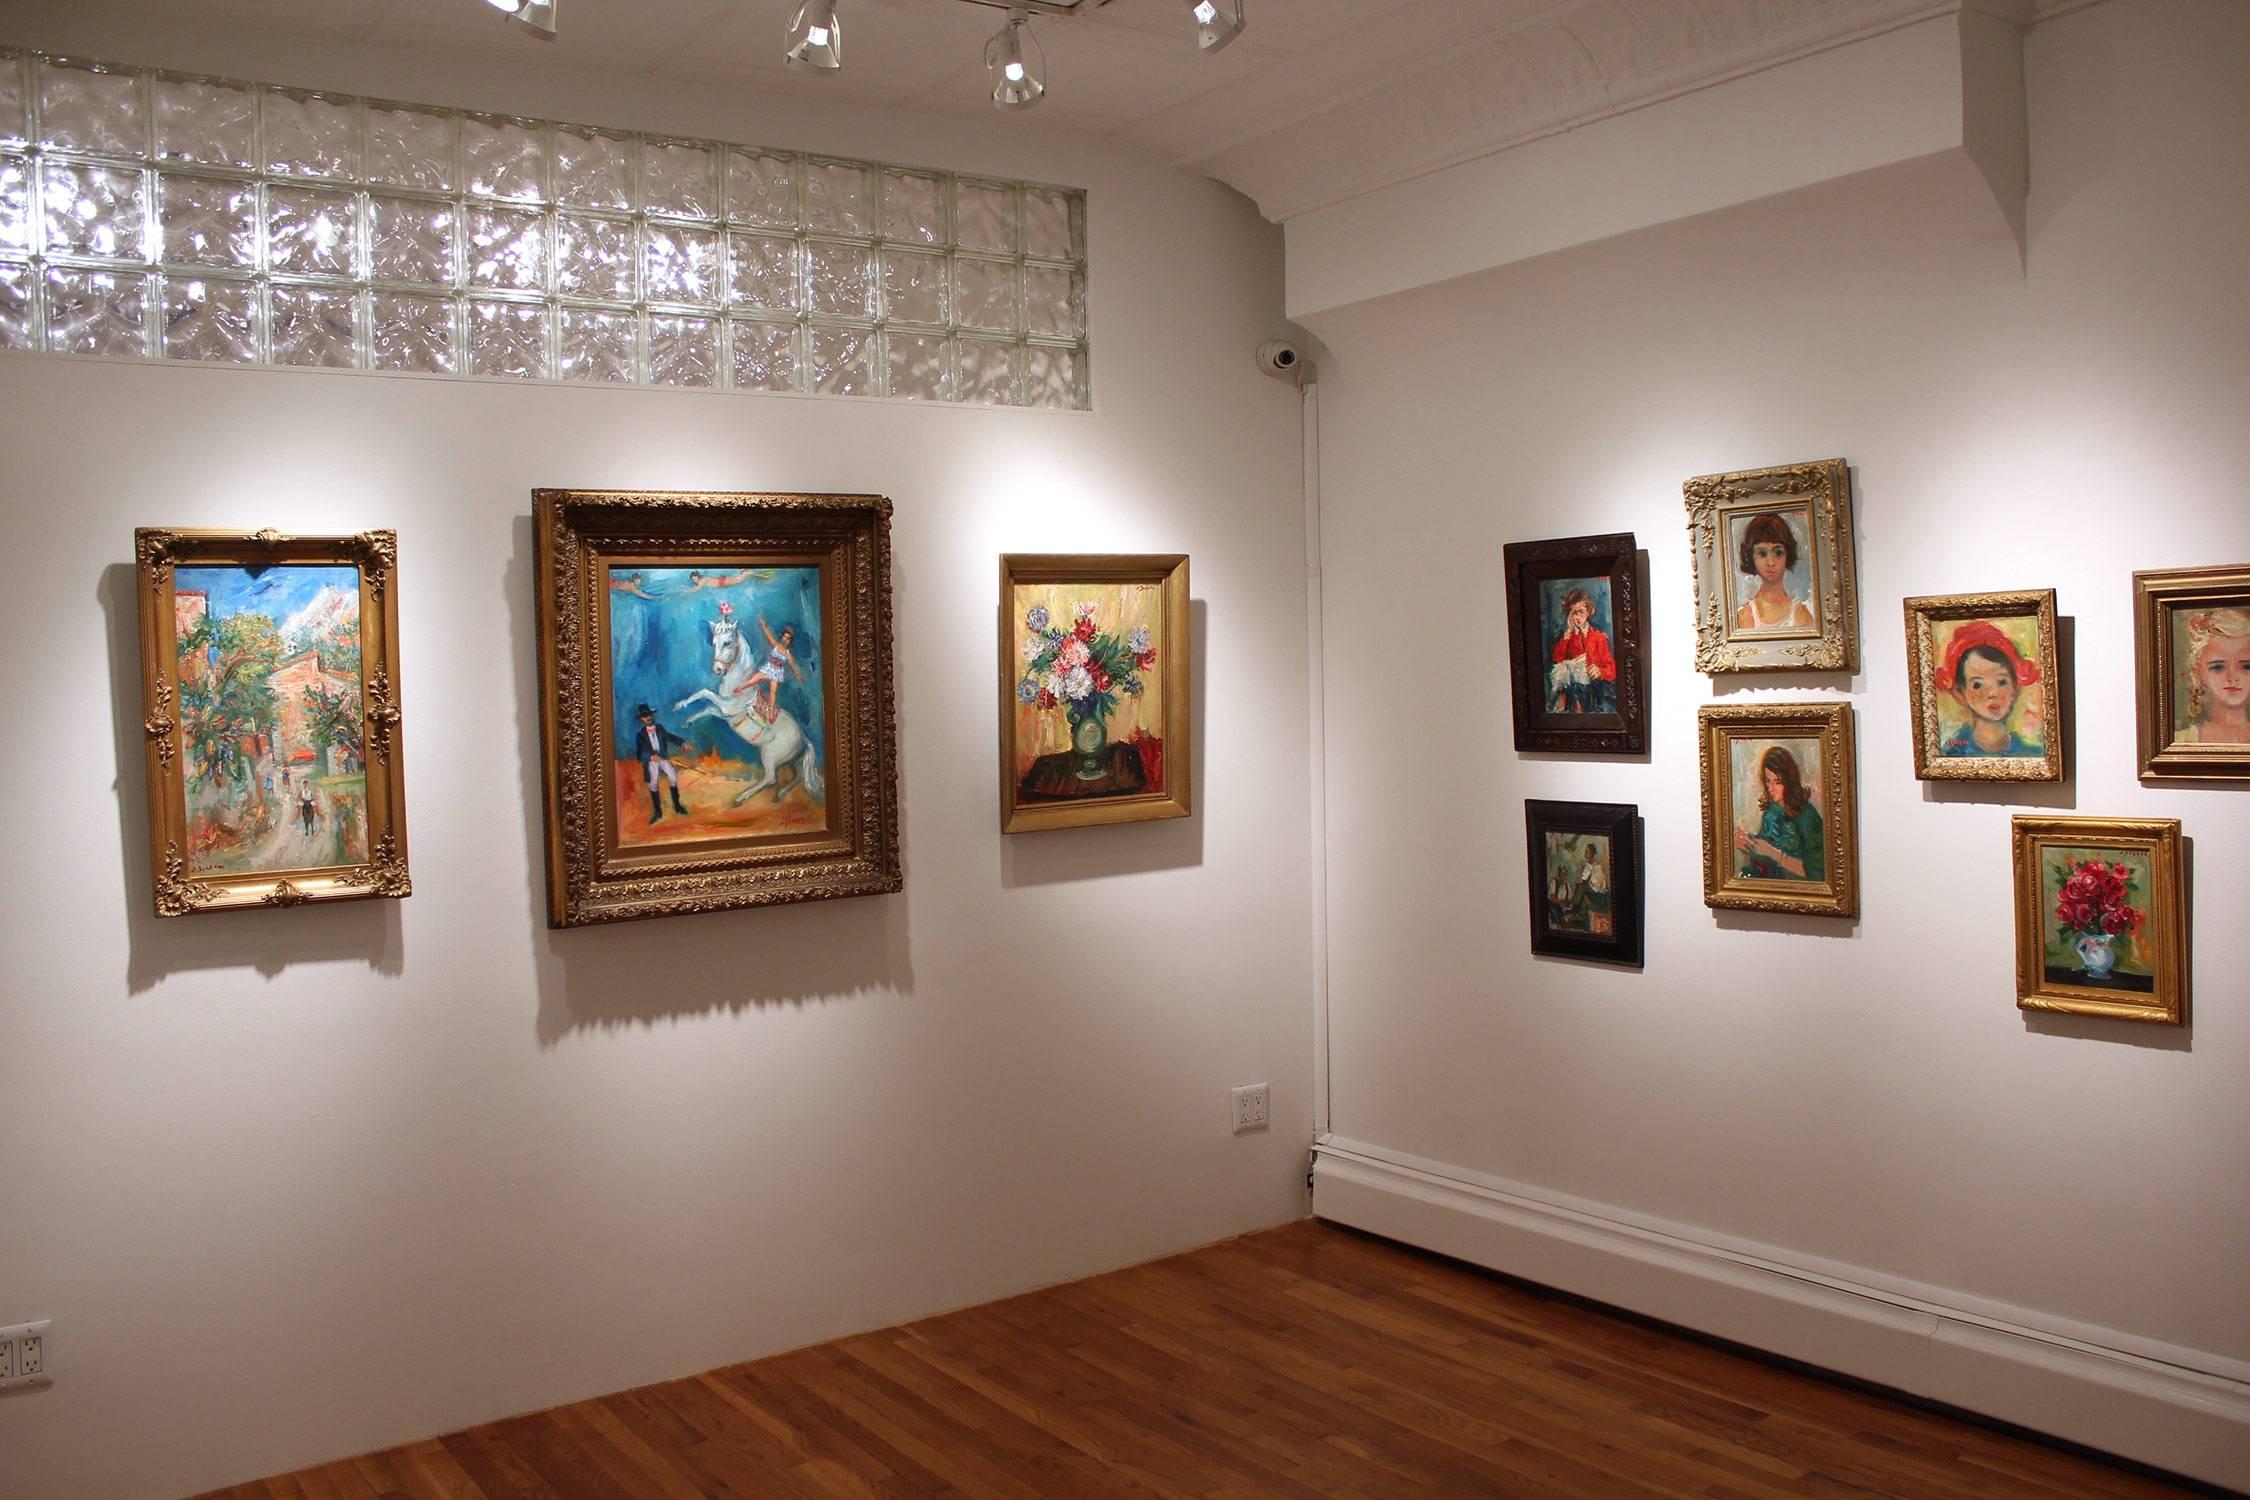 Jacques Zucker was a prolific artist whose works are exhibited in Museums and galleries around the world. Being heavily influenced by artist such as Soutine, Chagall, and Renoir, we can see hints of their styles suggested in many of his works.